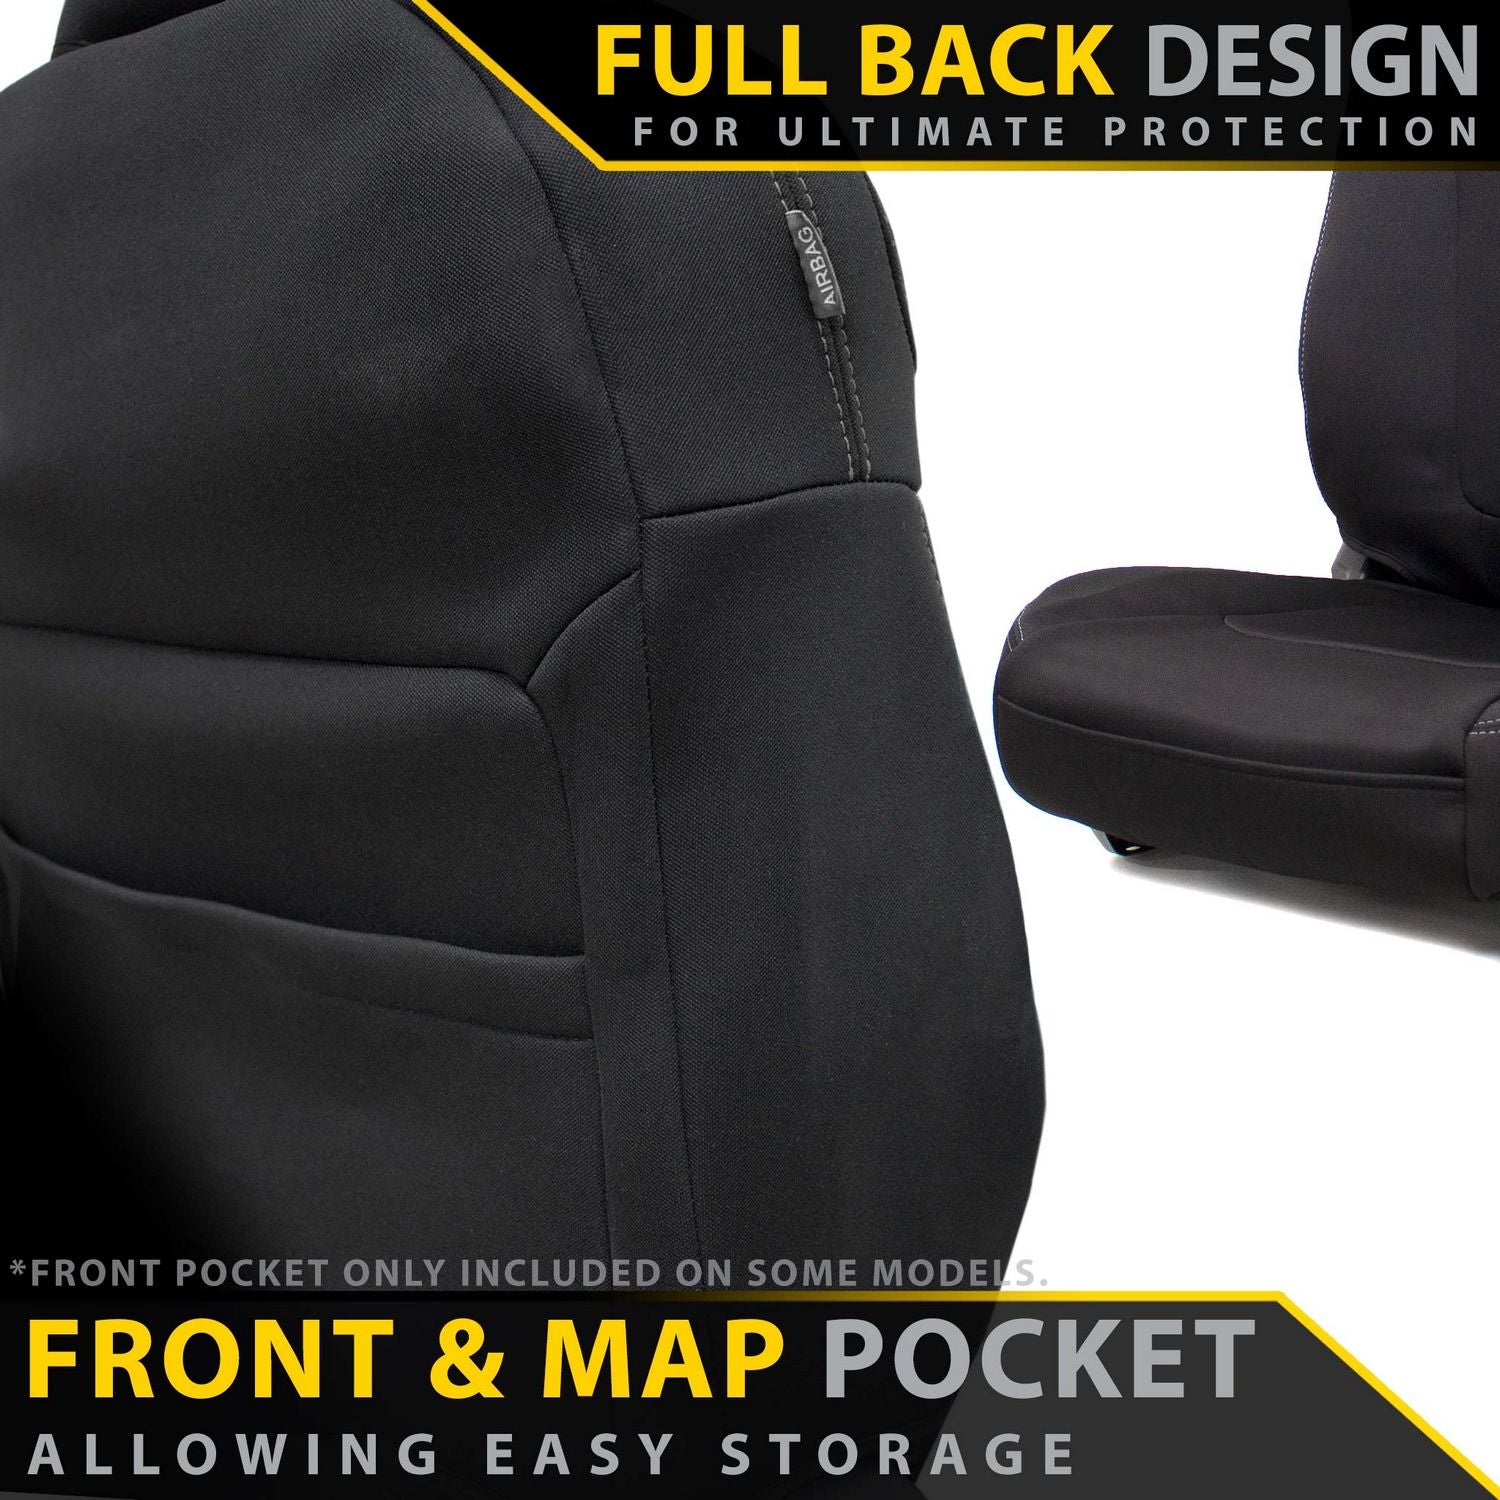 Mitsubishi Challenger PB & PC Neoprene 2x Front Seat Covers (Made to Order)